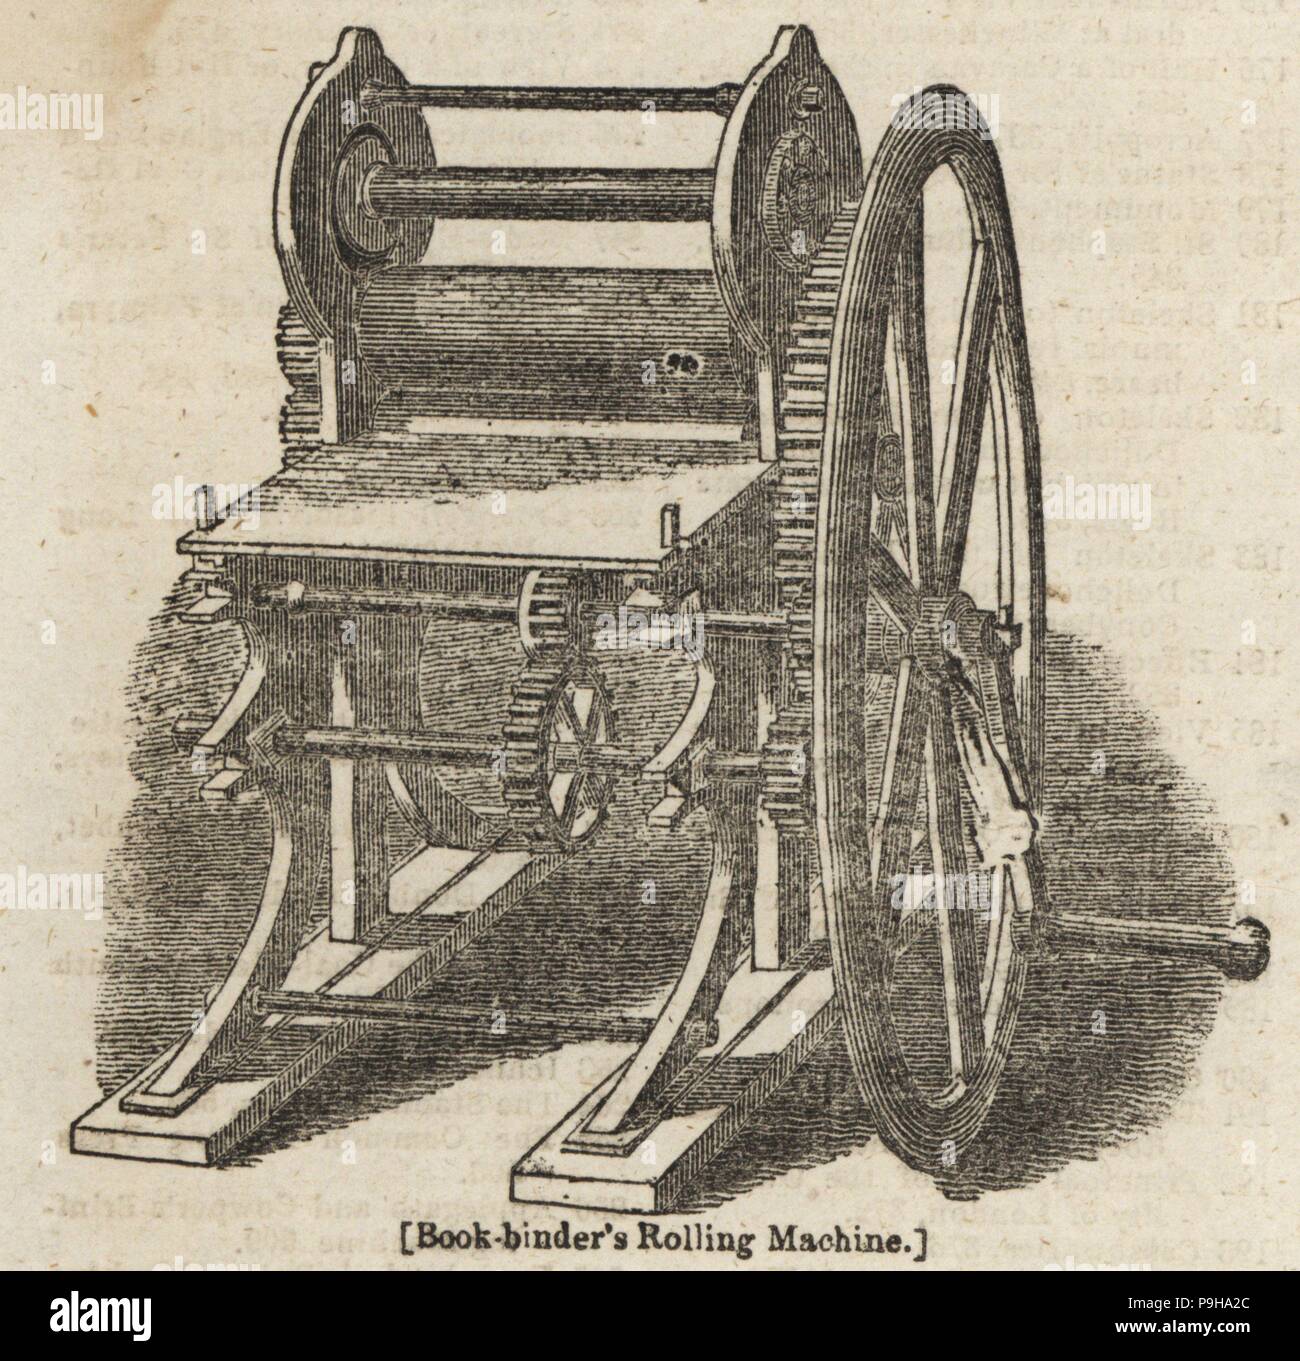 Book-binder's rolling machine. The sheets of paper that make up the book are squeezed and rolled into a solid bookblock. Woodblock engraving from the Penny Magazine, Society for the Diffusion of Useful Knowledge, 1833. Stock Photo